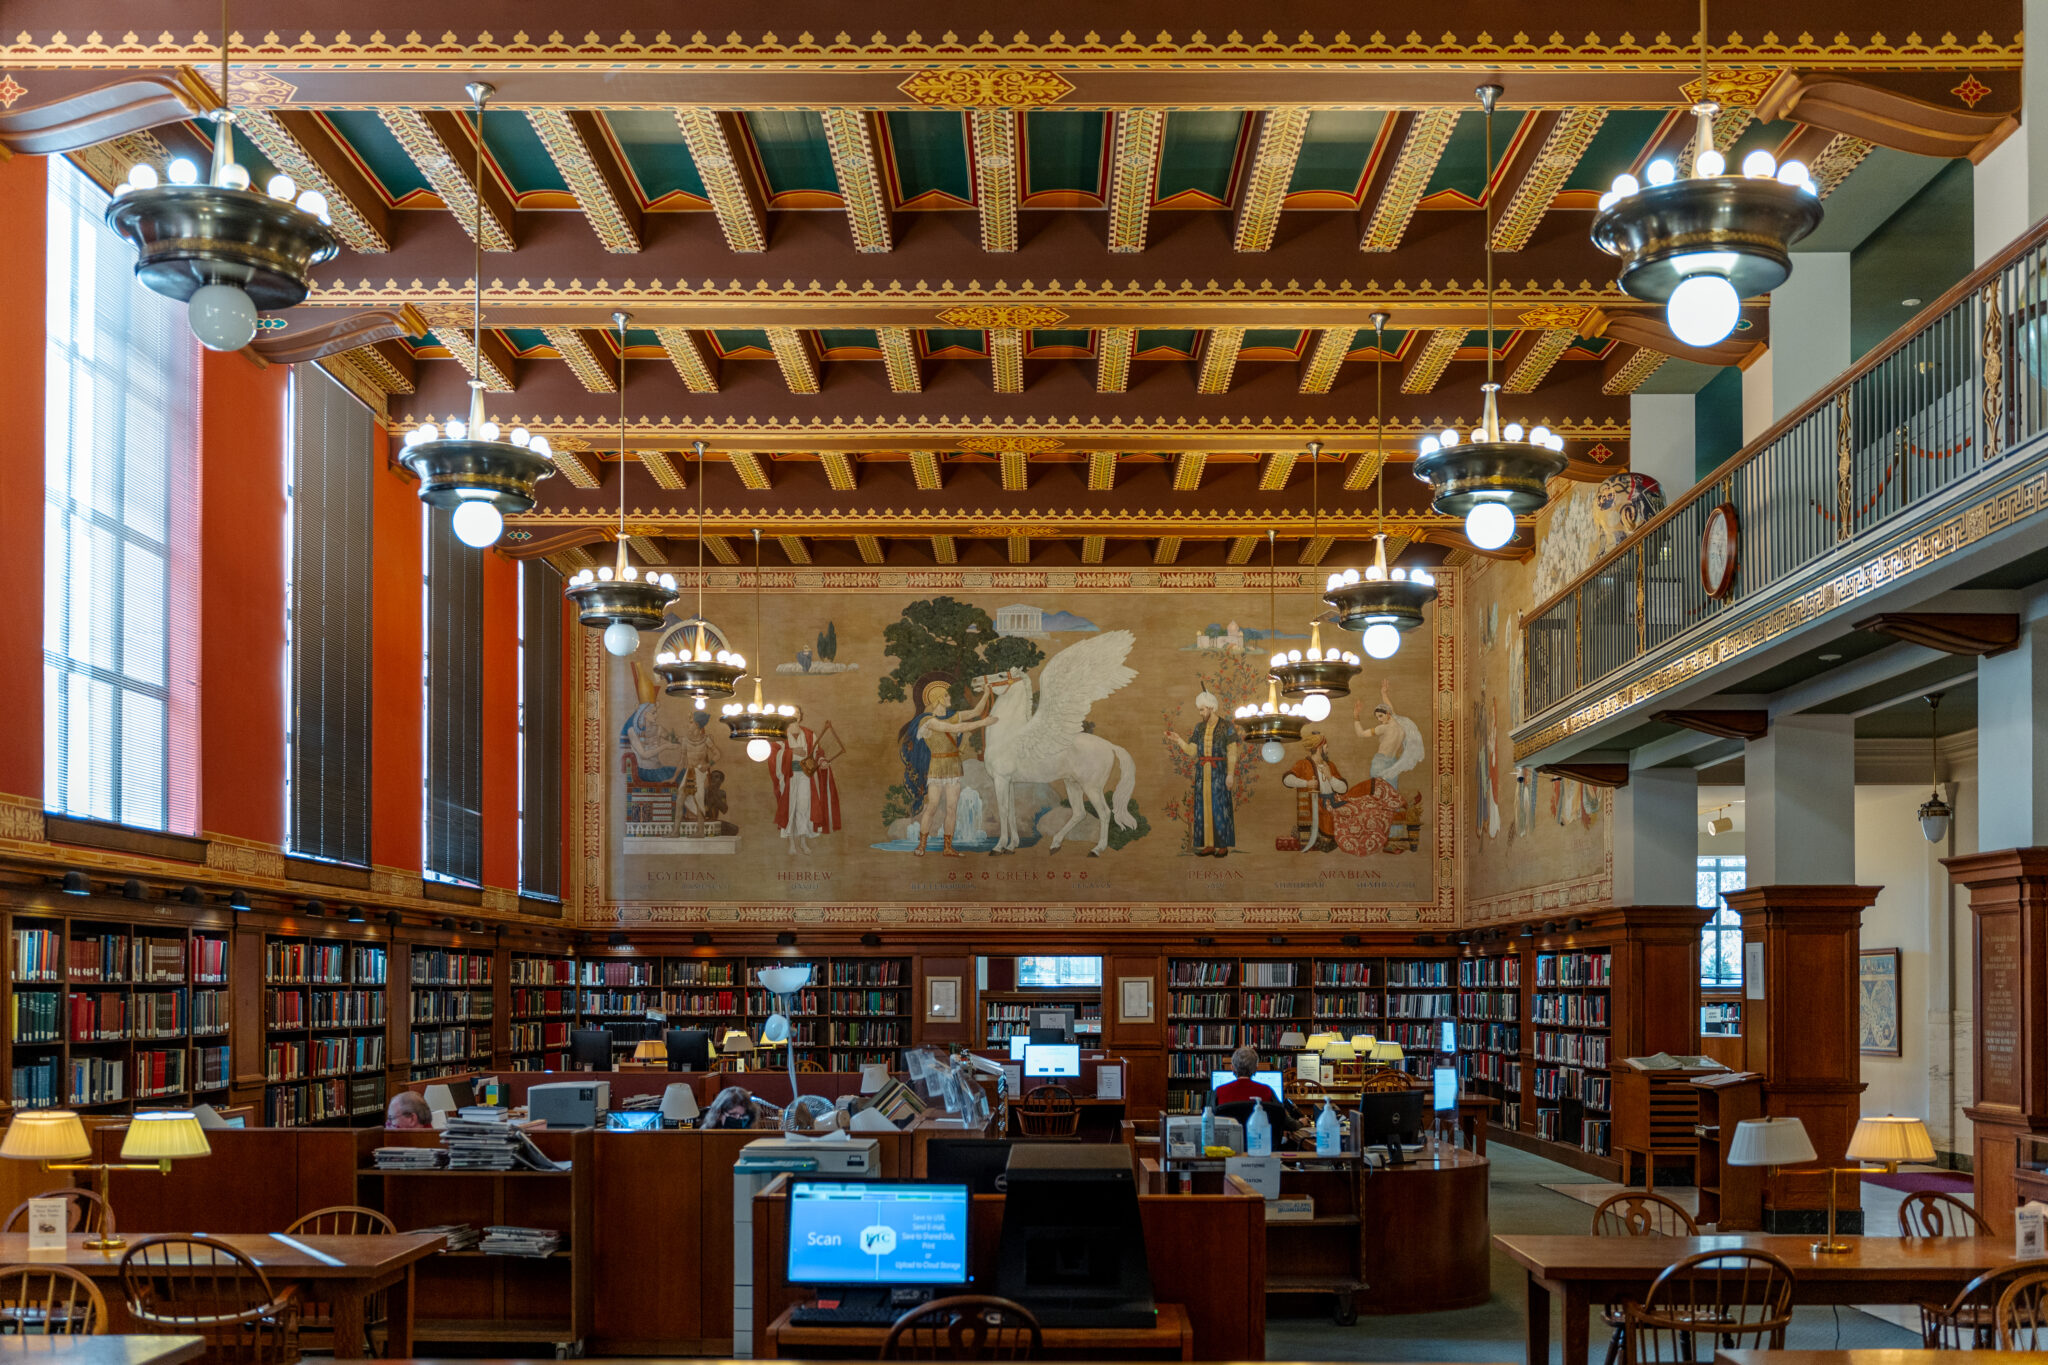 The Linn-Henley Research Library in Birmingham is full of amazing murals—check it out [PHOTOS]